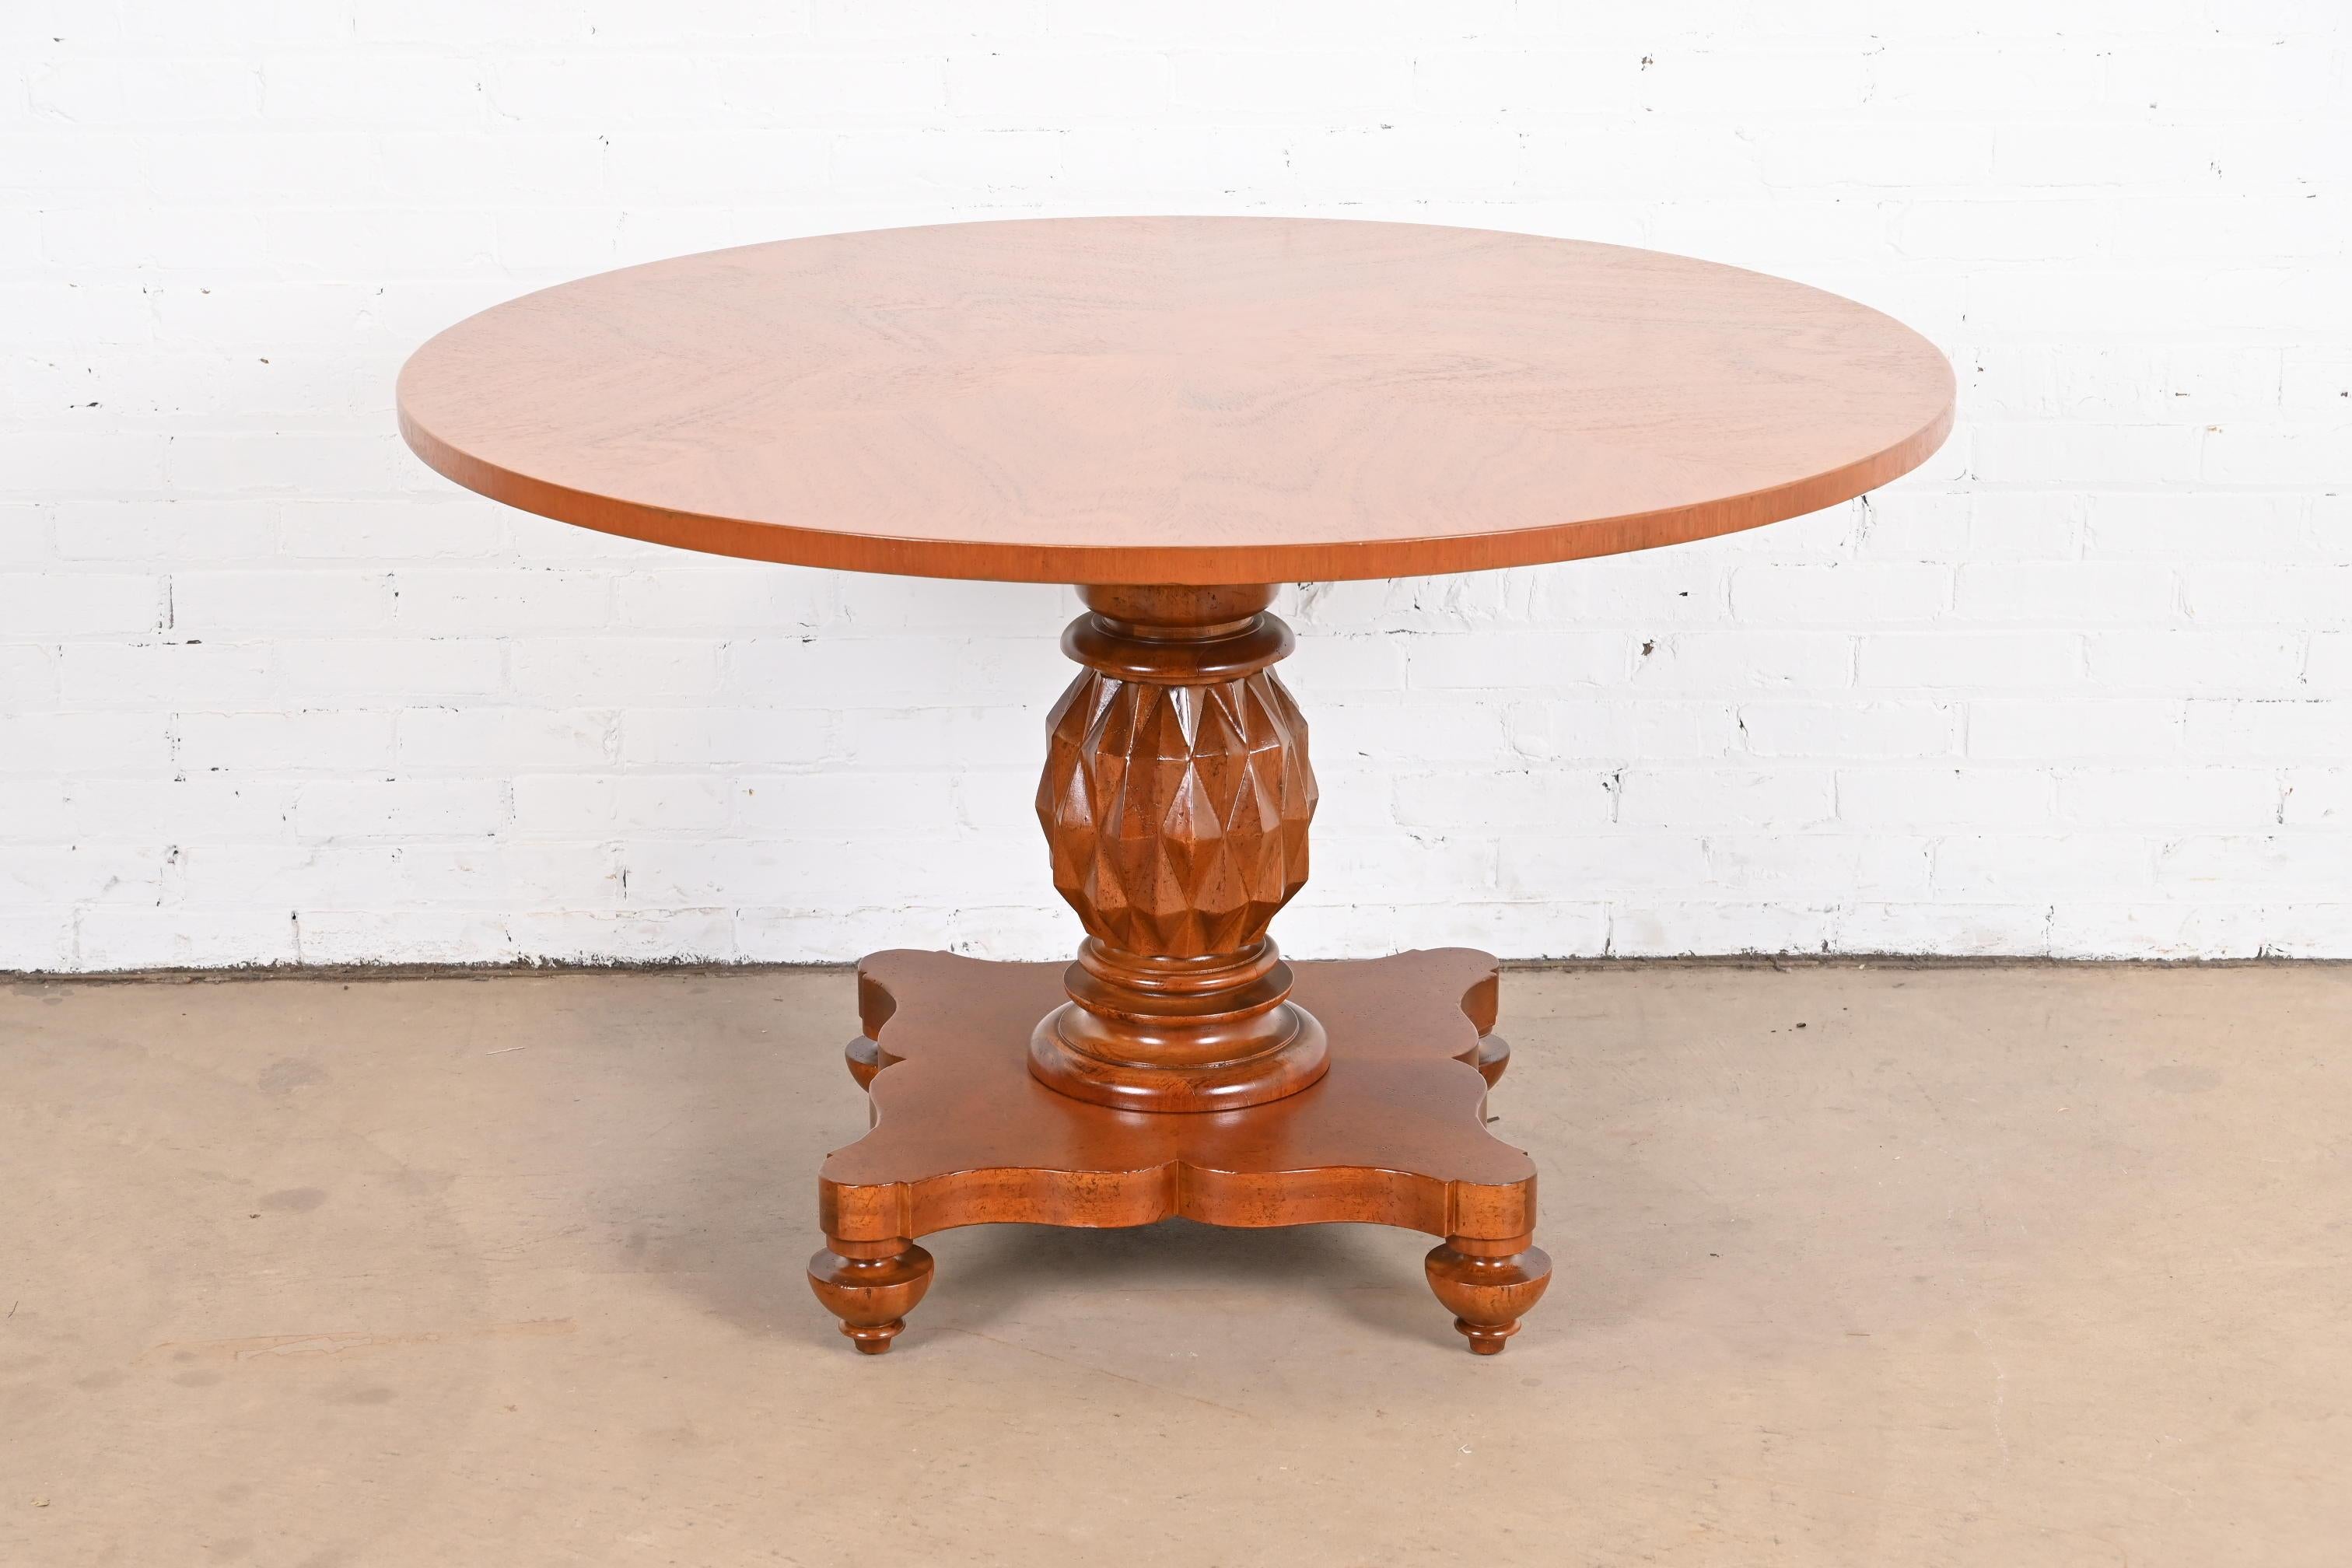 A gorgeous Italian Empire or Neoclassical style round pedestal dining breakfast table, game table, or center table.

By Baker Furniture, 